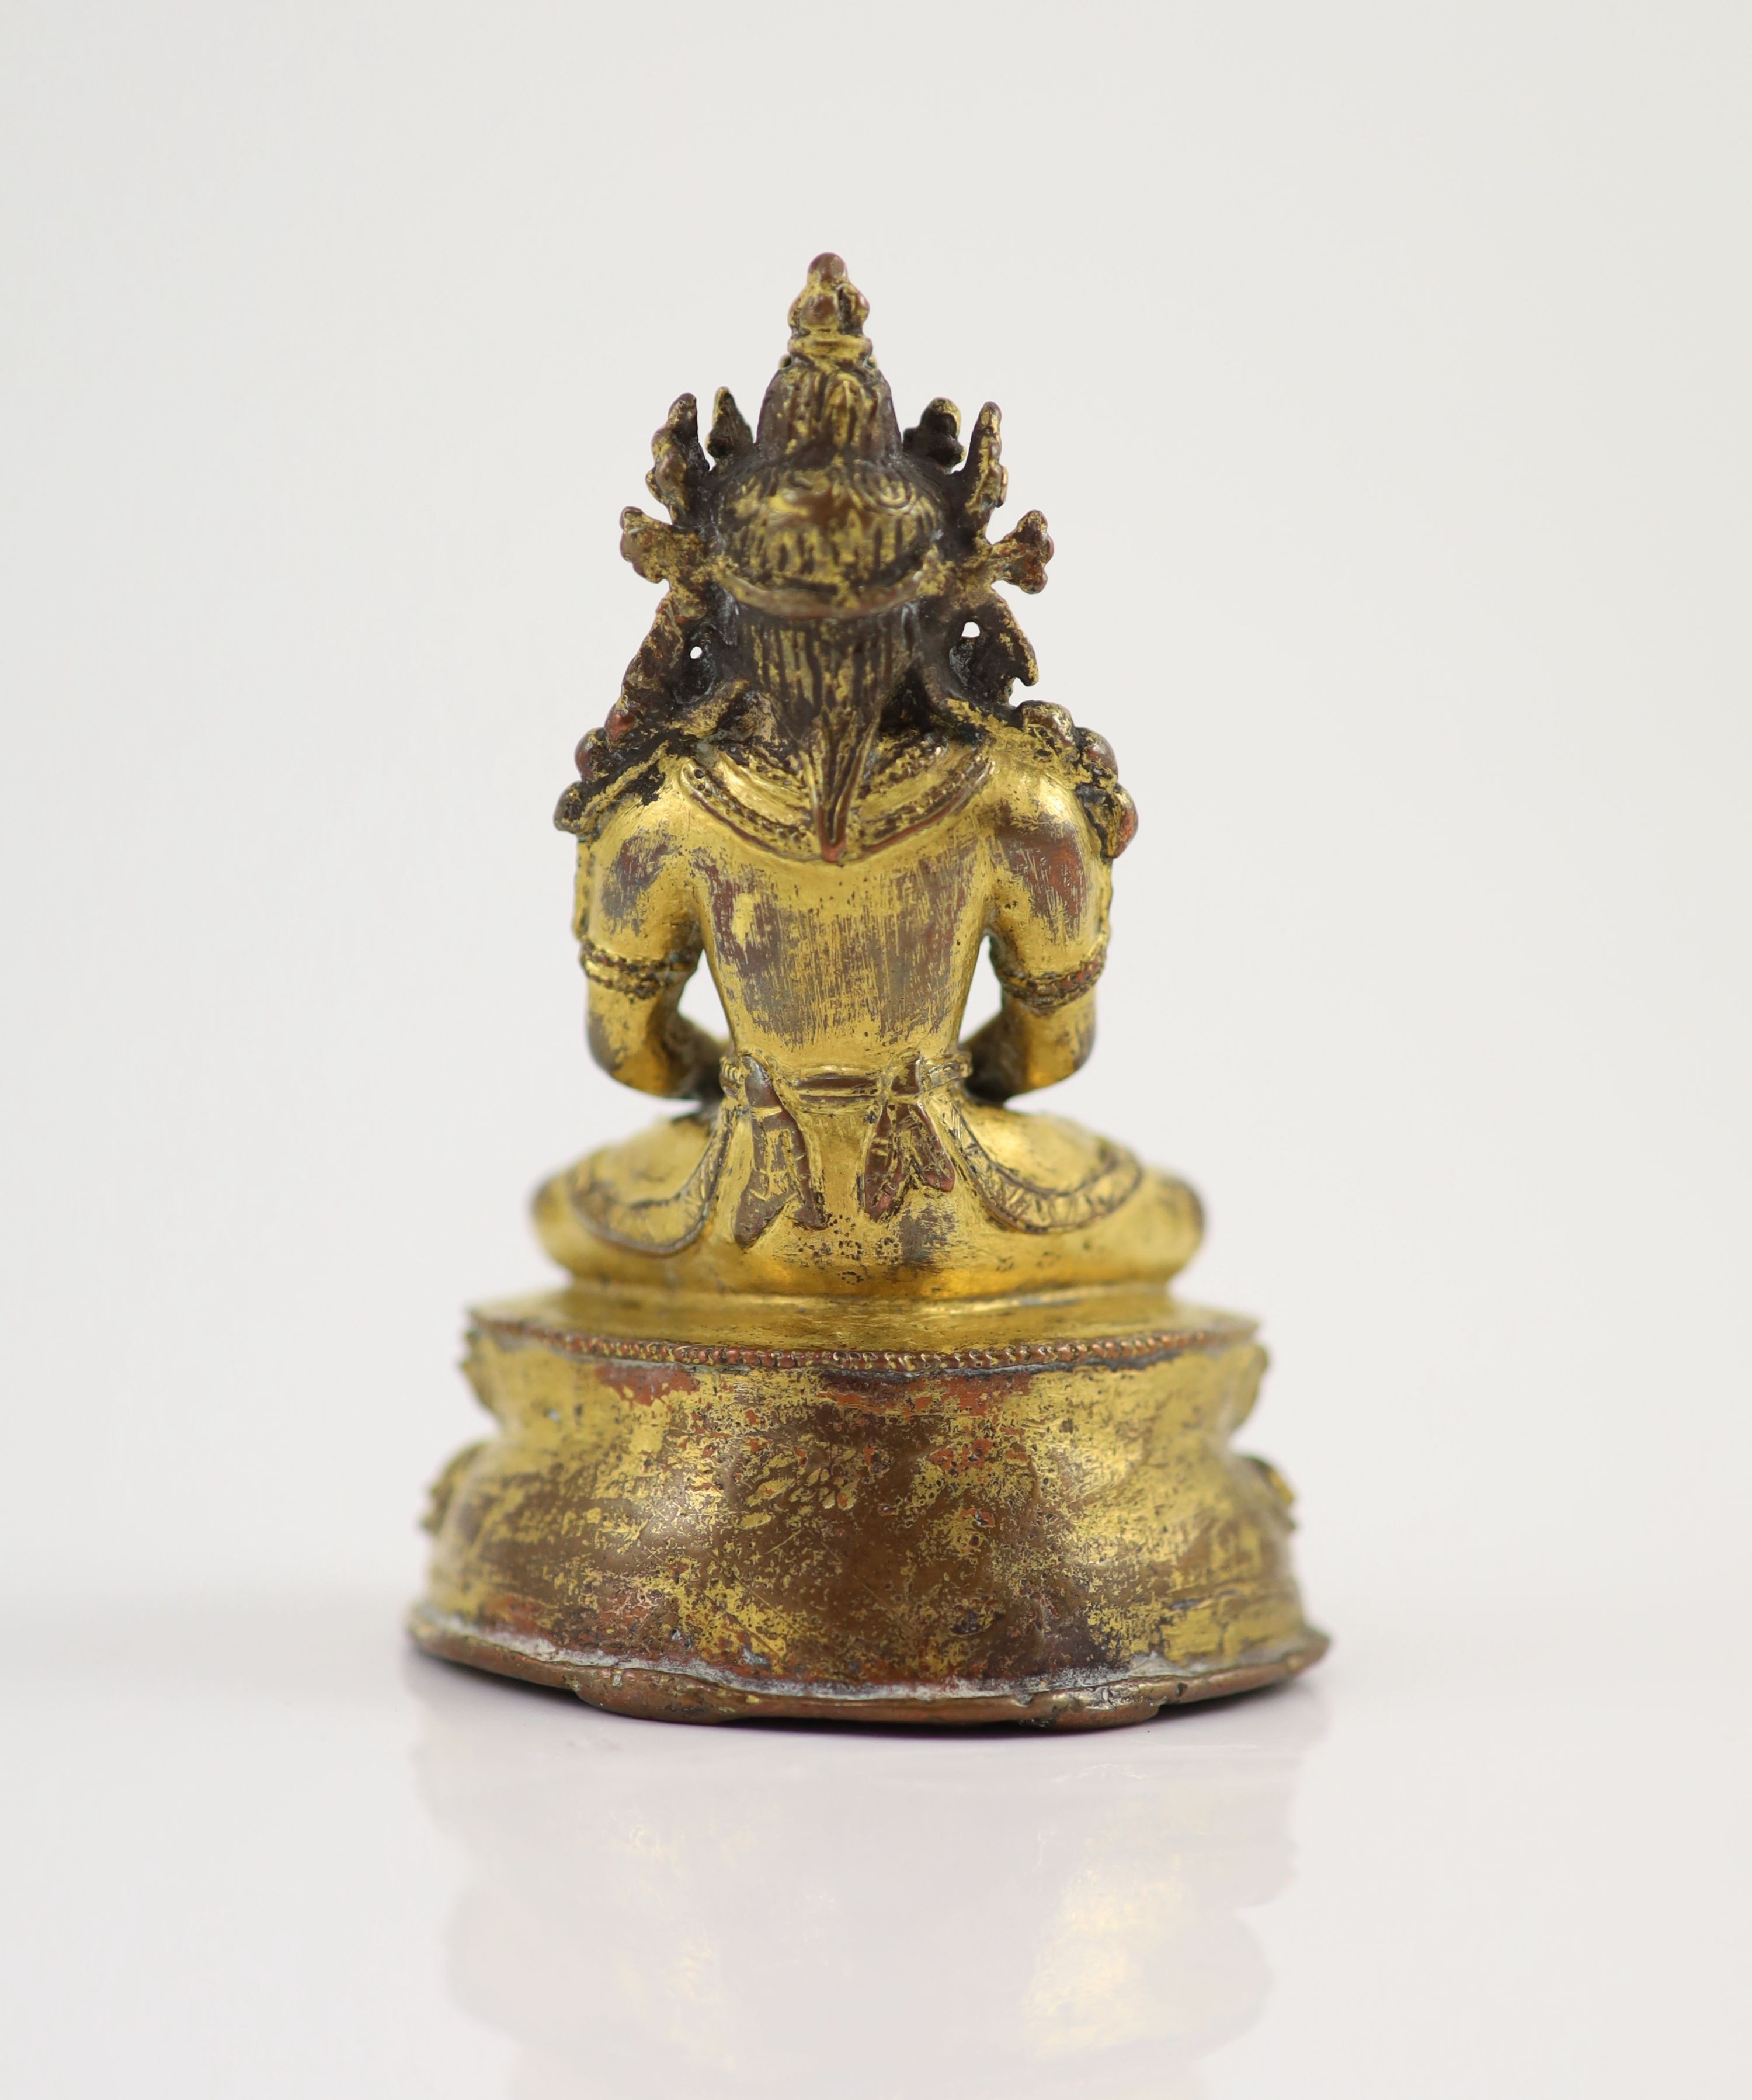 A Tibetan gilt copper alloy seated figure of Amitayus, possibly 15th/16th century, 9cm high